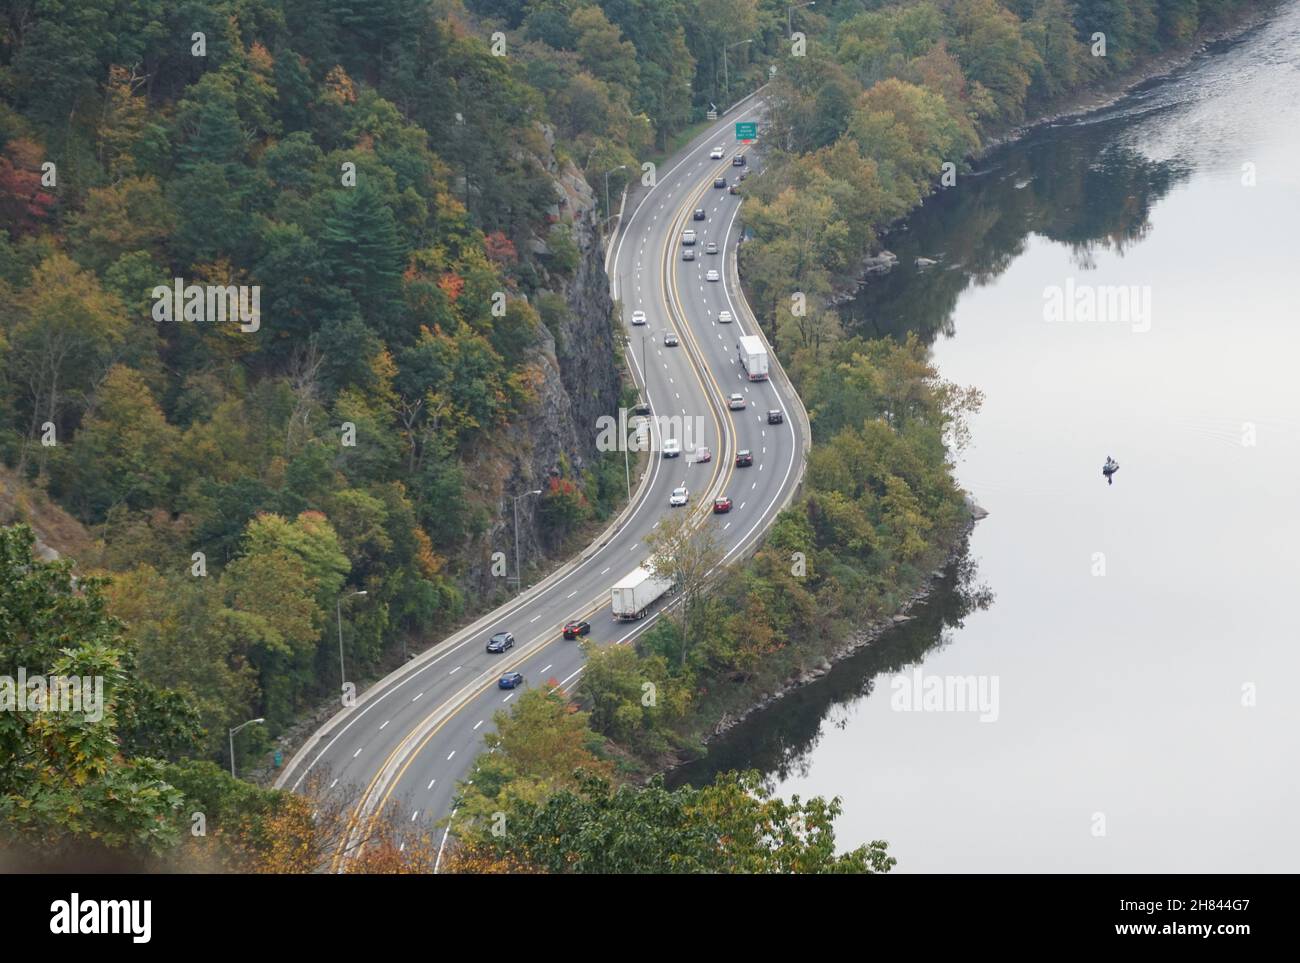 The aerial view of the traffic on Interstate 80 towards Delaware Water Gap overlooking fall foliage on the mountain near Hardwick Township, New Jersey Stock Photo